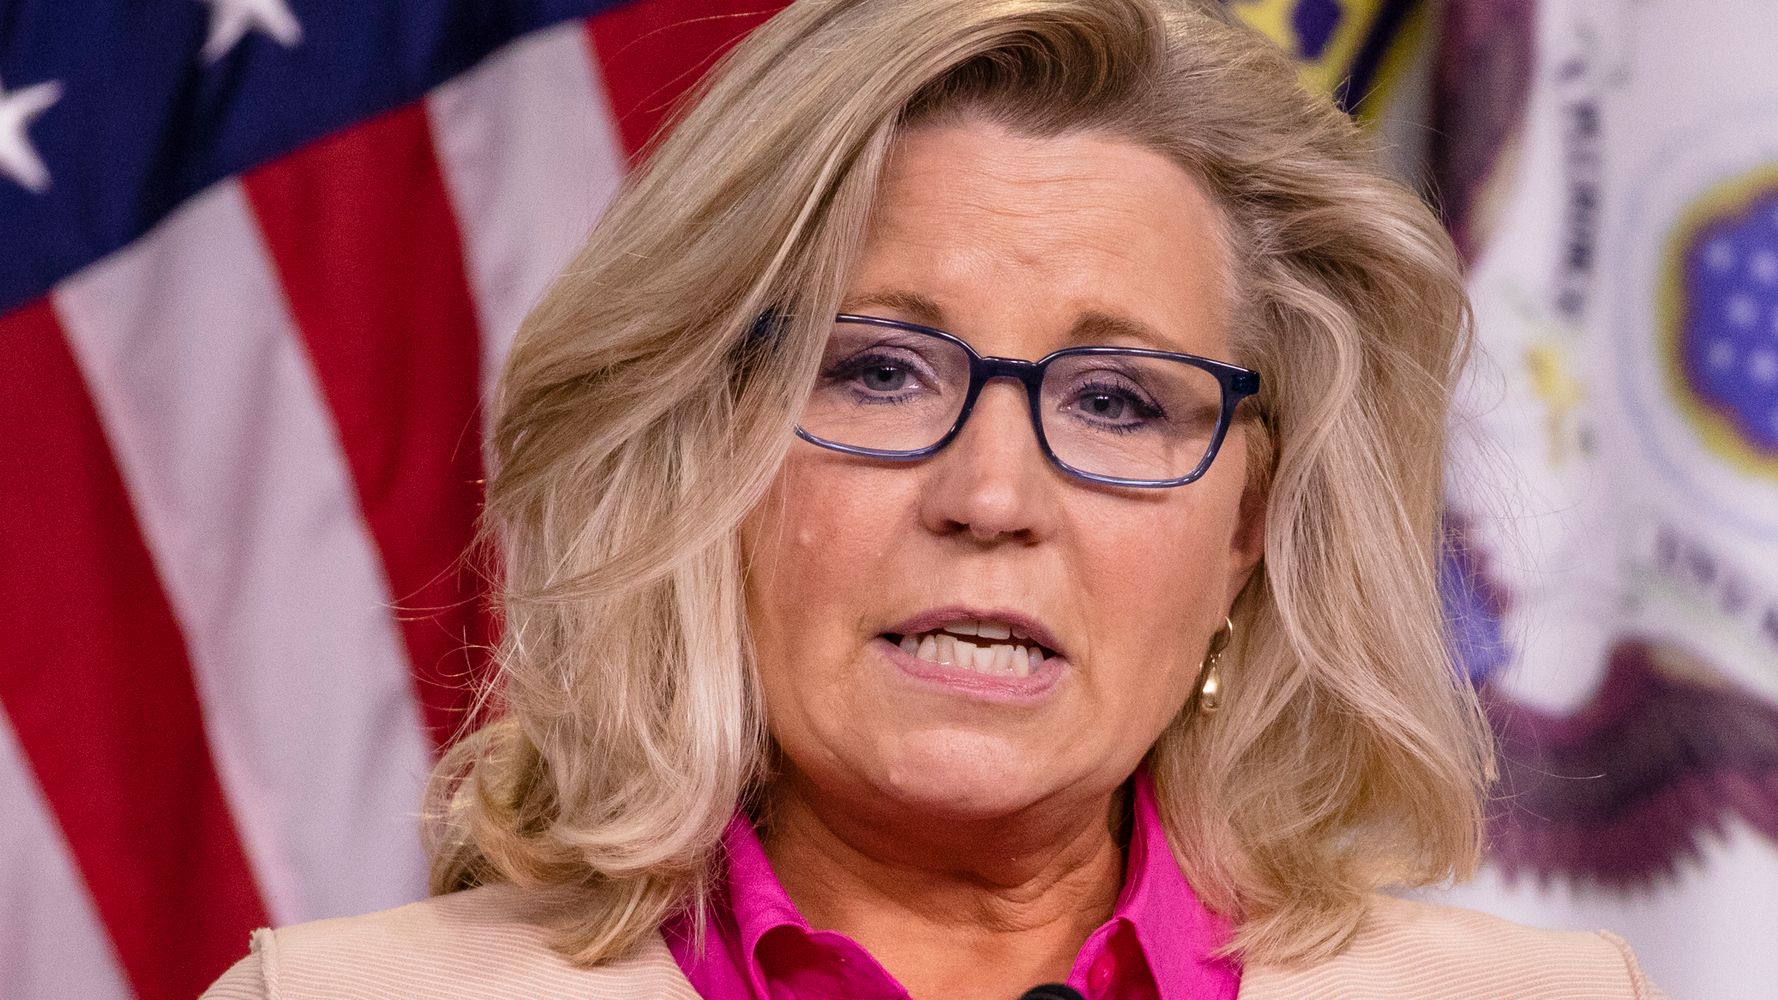 www.huffpost.com: Liz Cheney: Republicans Need ‘To Make Clear We Aren’t The Party Of White Supremacy’